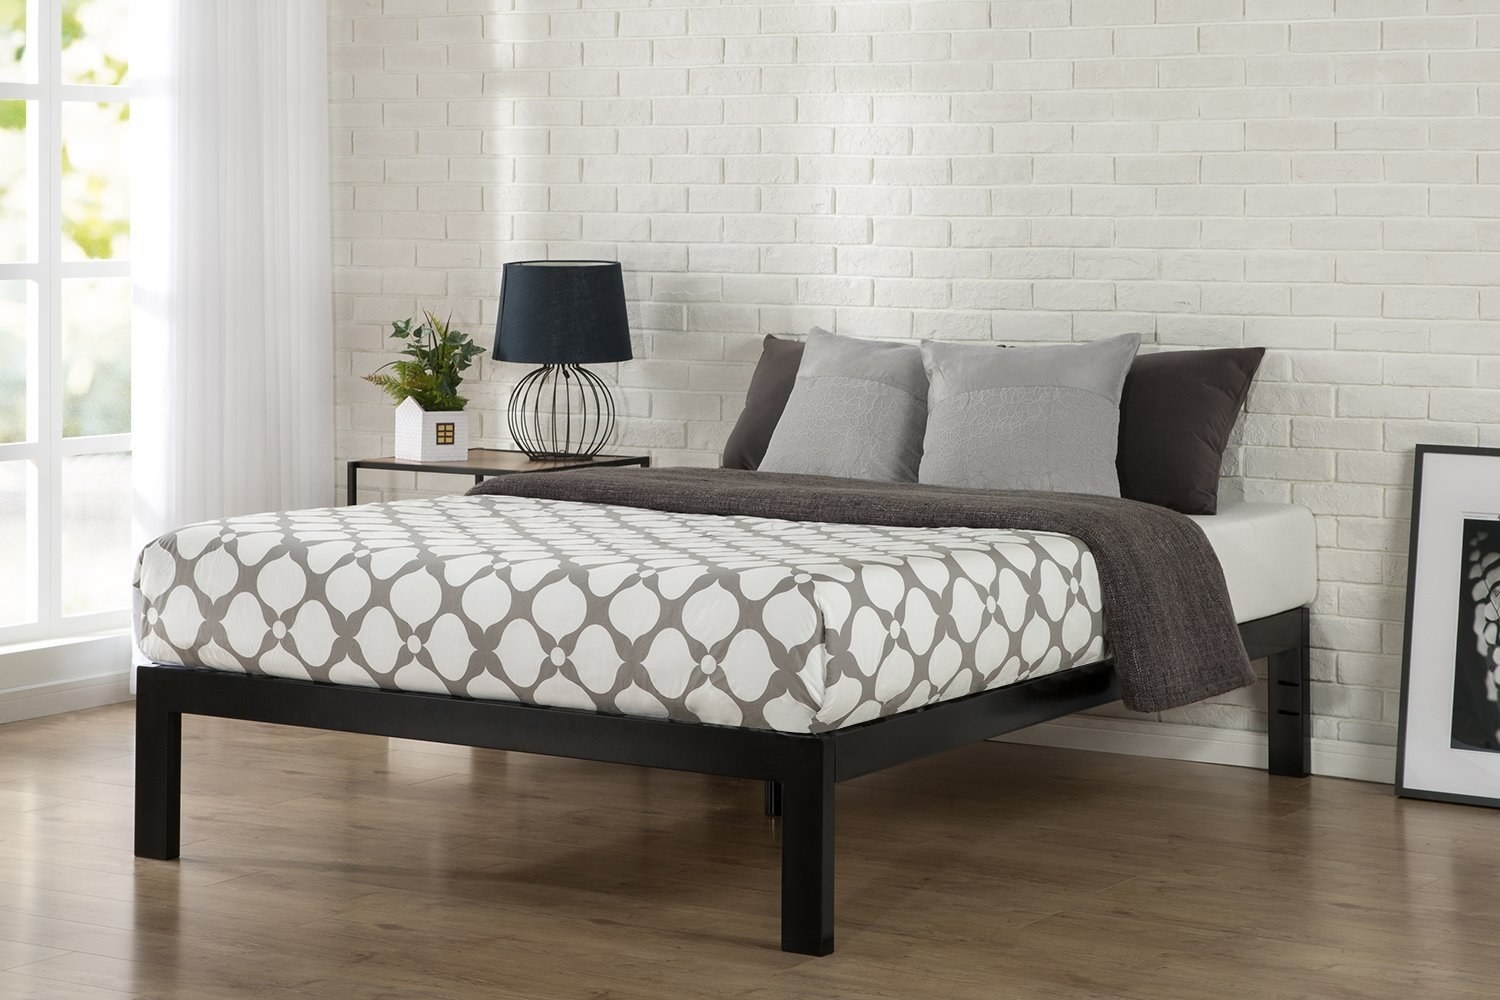 bed frame with bedding and nightstand with lamp